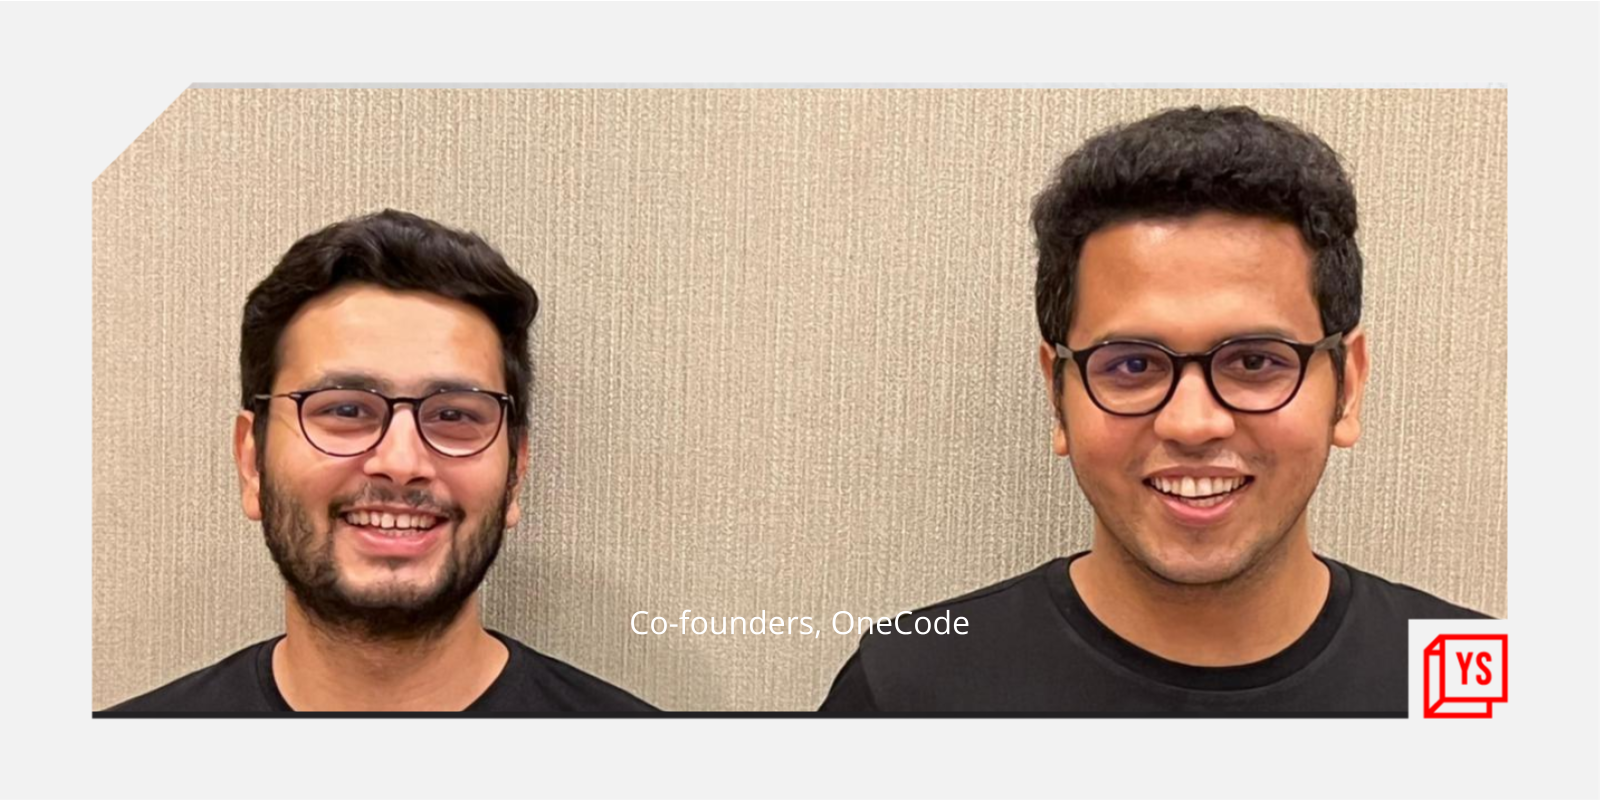 [Funding alert] OneCode raises $13M in Series A round led by General Catalyst